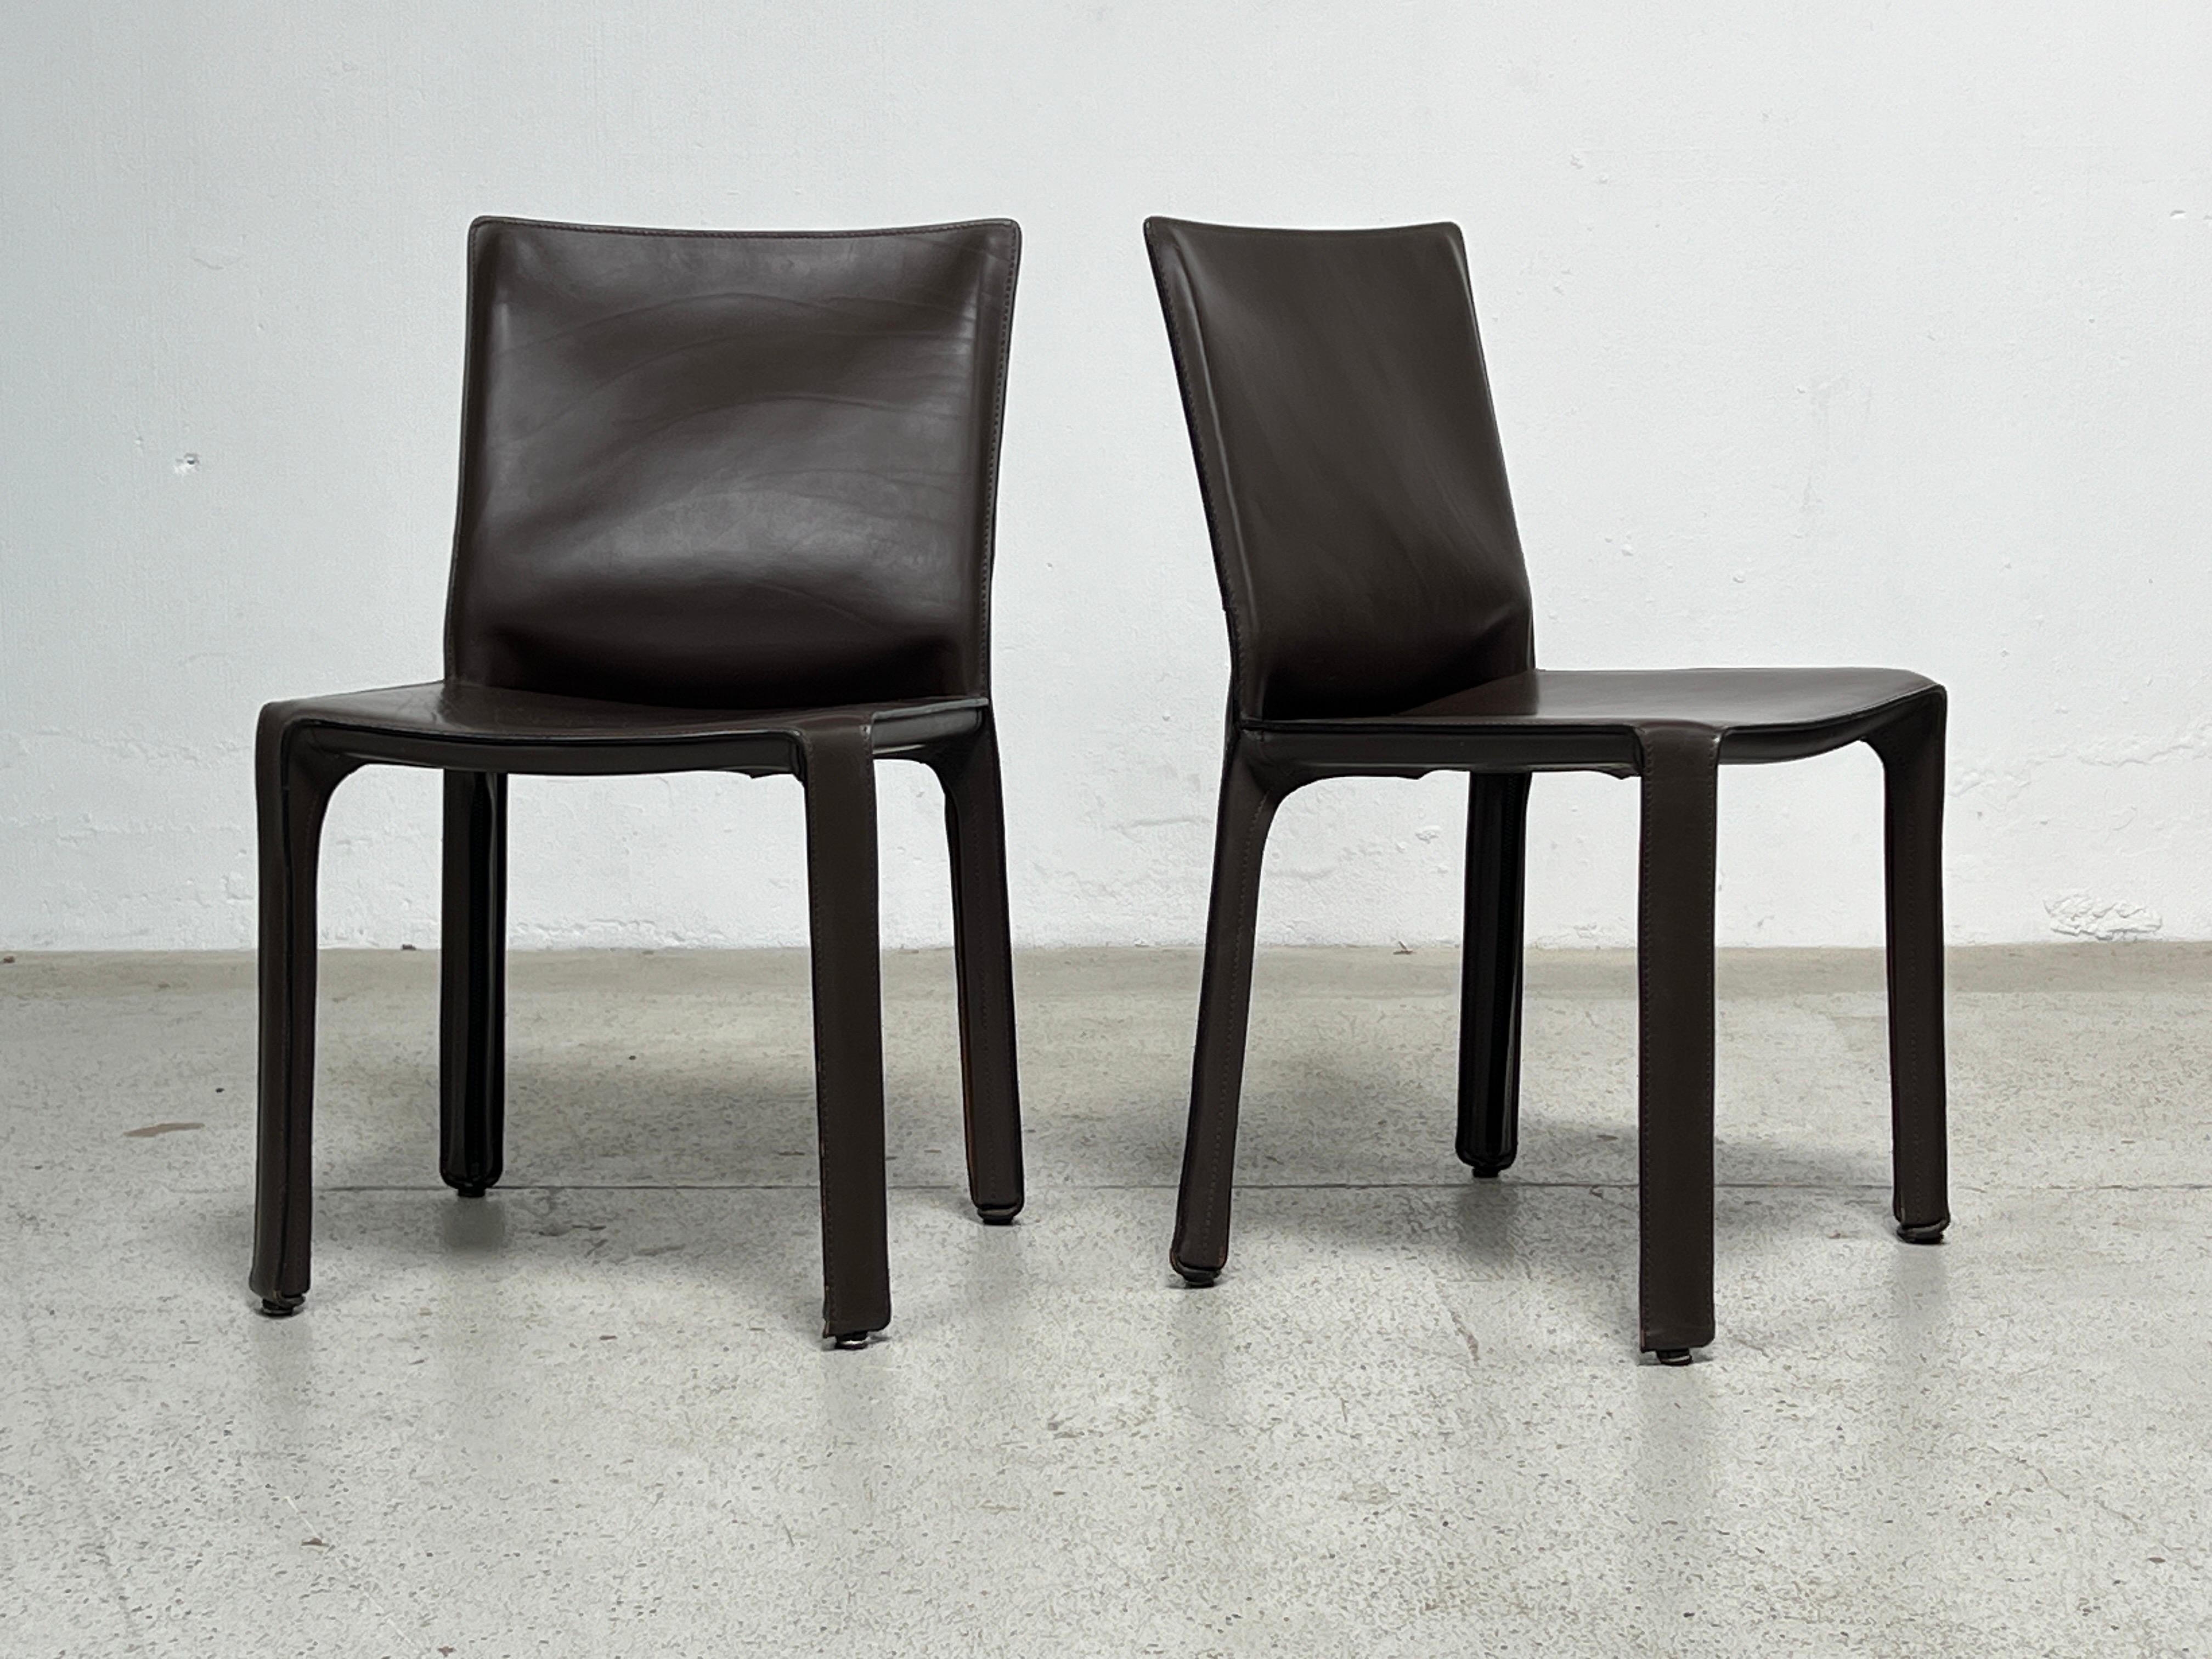 Four Brown Leather Cab Chairs by Mario Bellini  For Sale 4